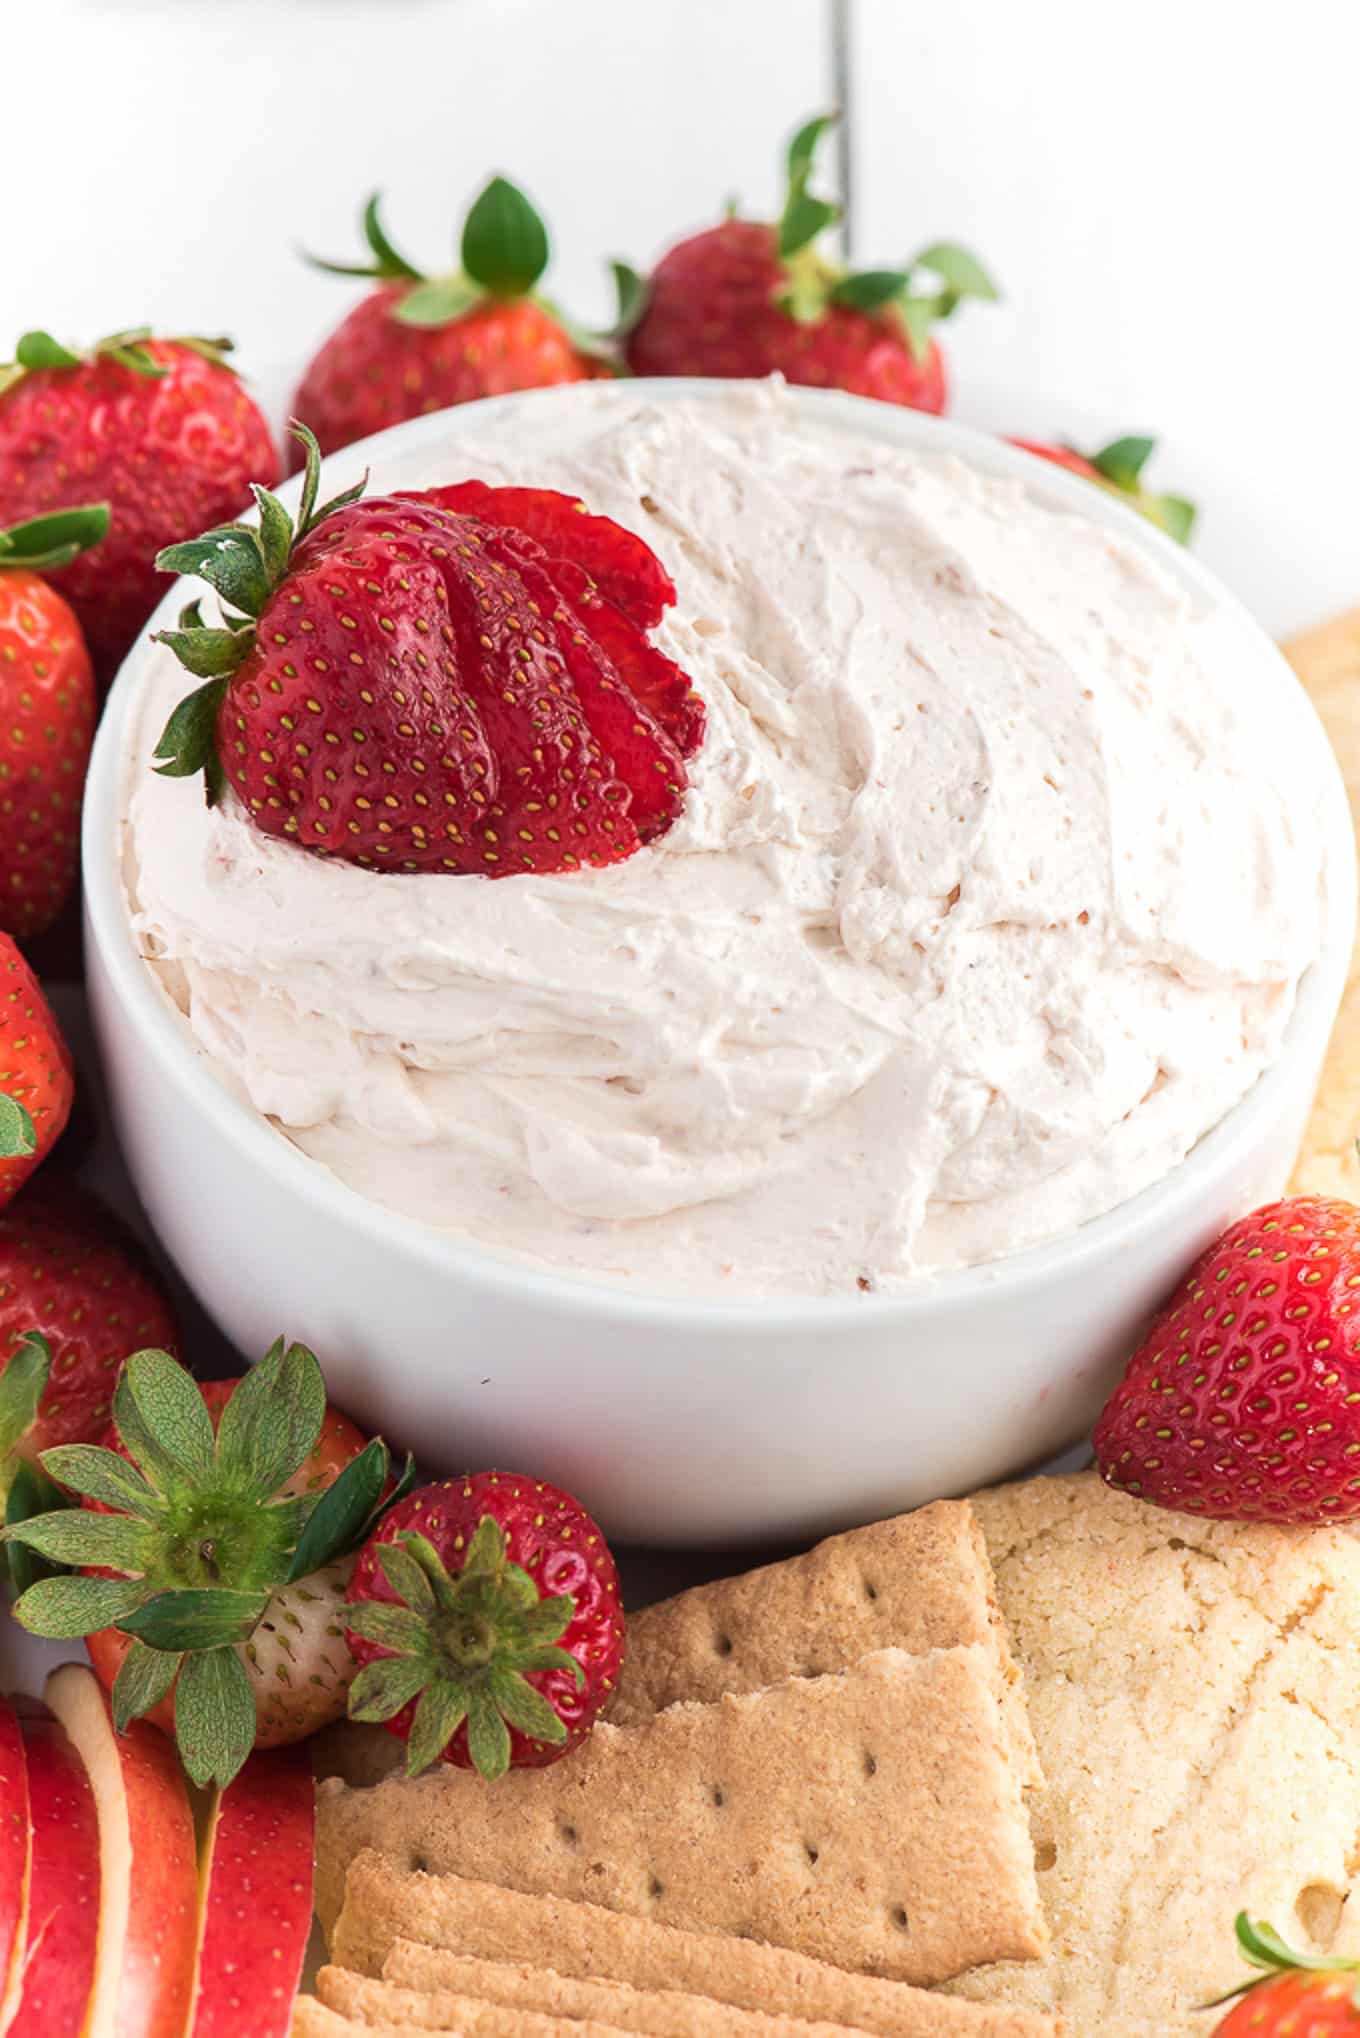 Delicious prepared fruit dip garnished with a strawberry.